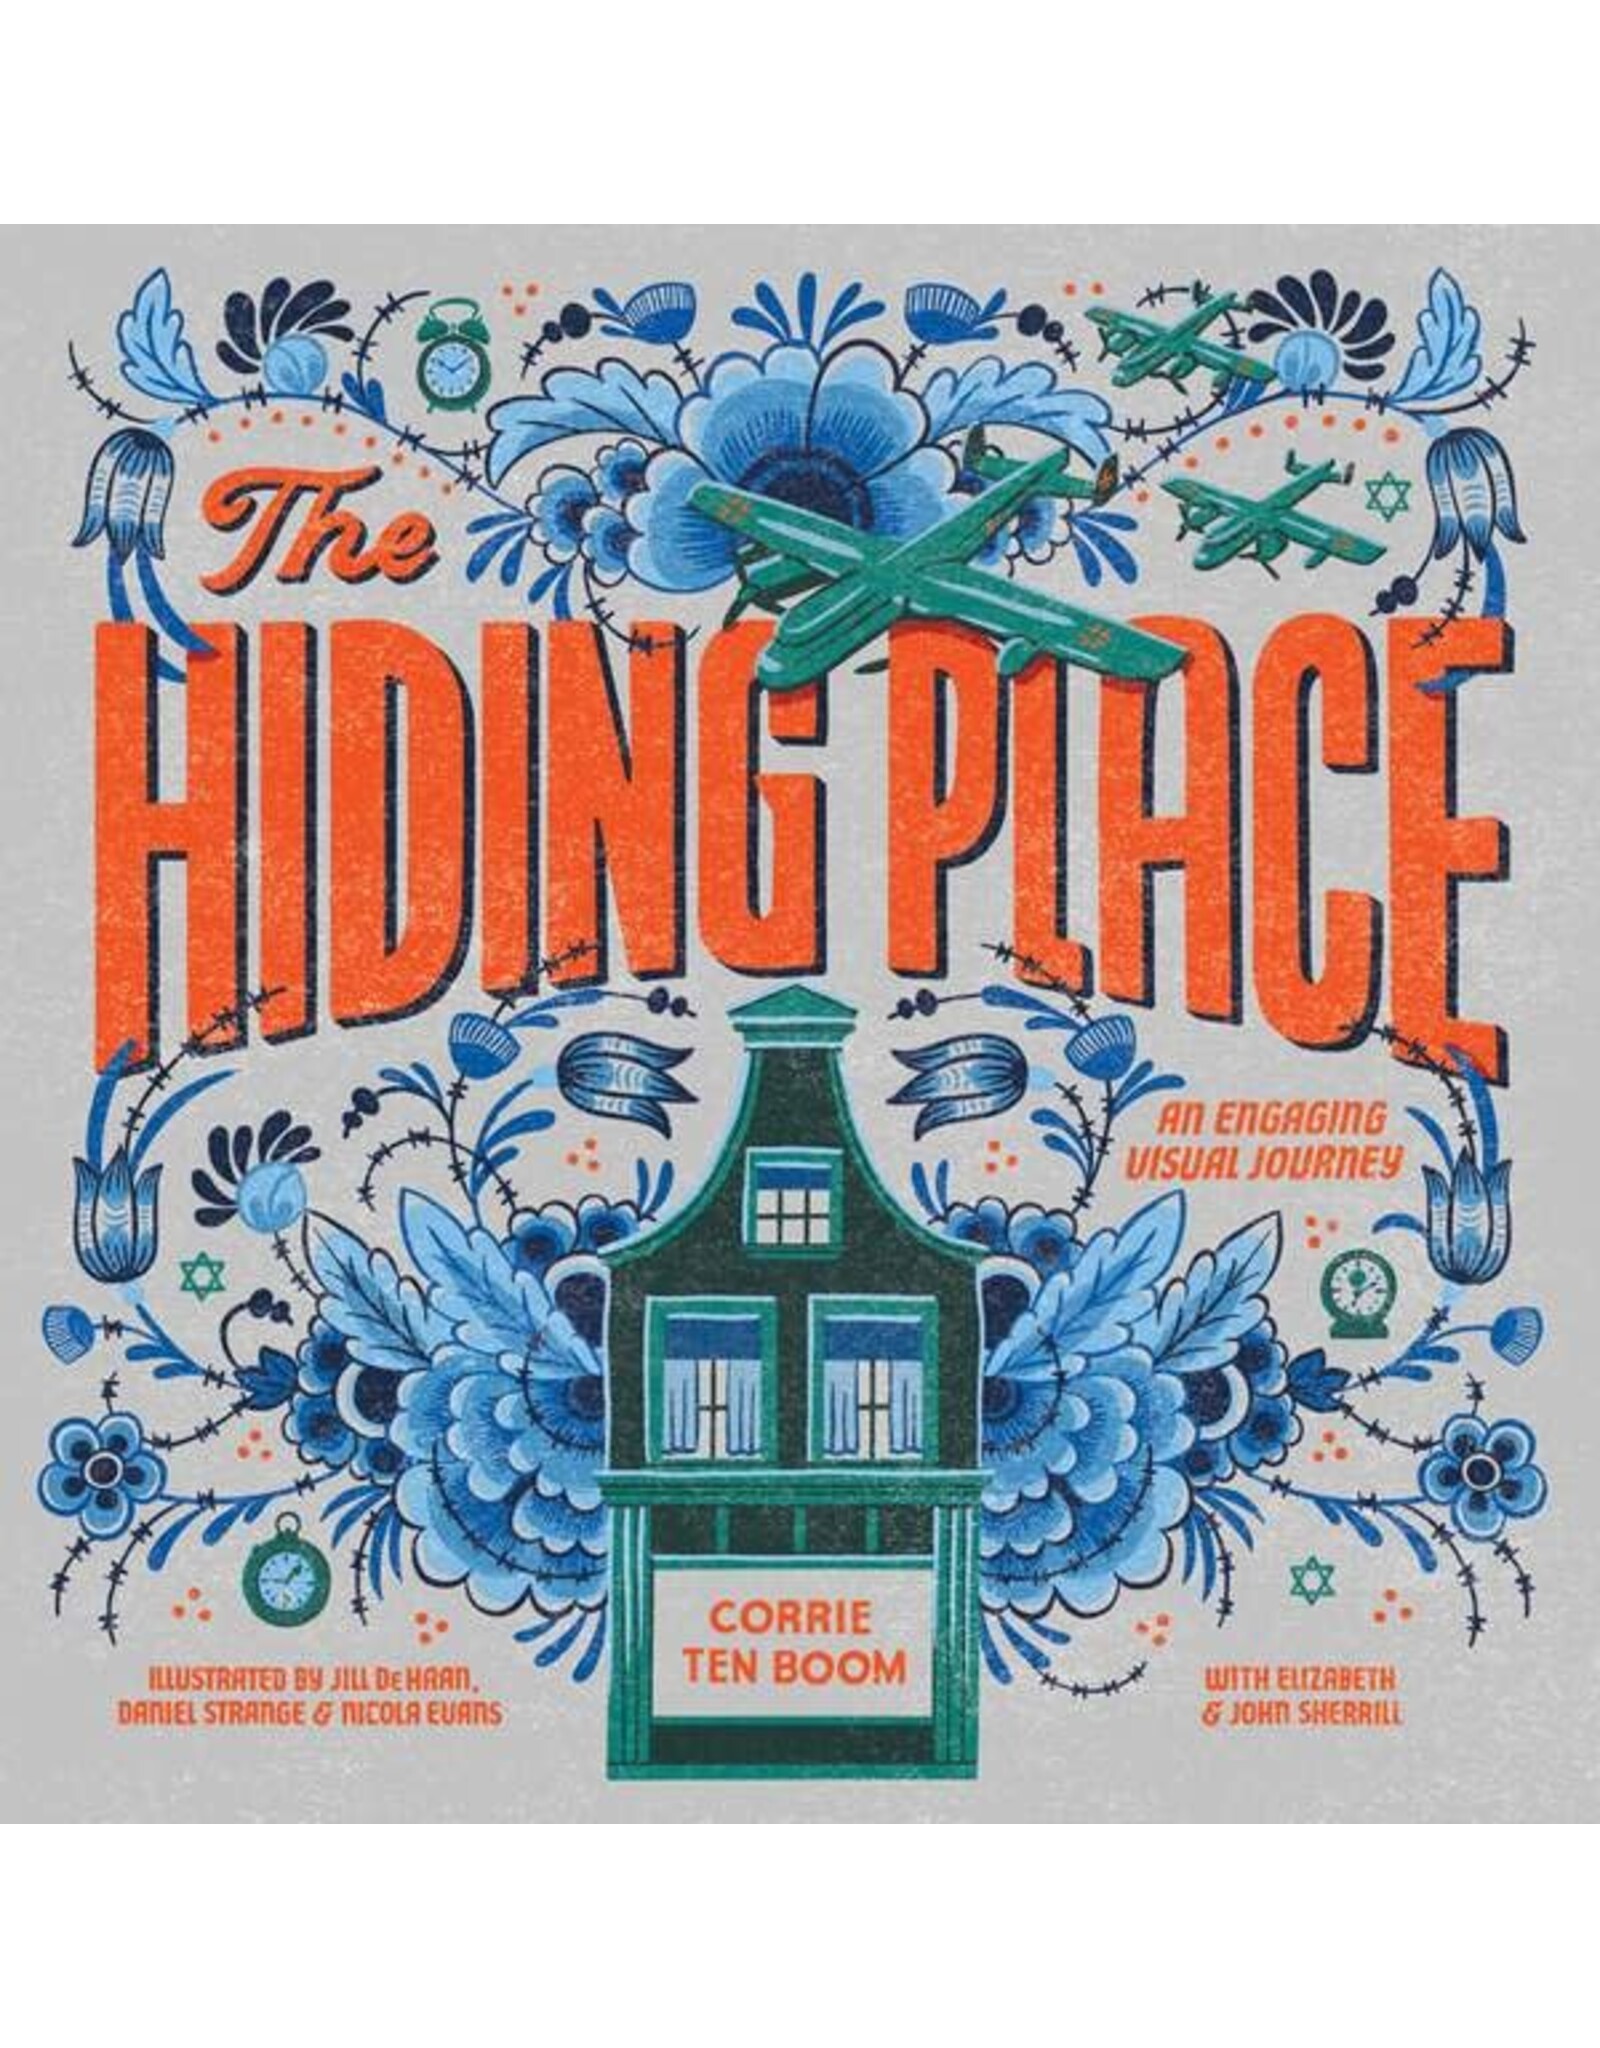 Corriie ten Boom, Elizaeth and John Sherrill The Hiding Place (Encouraging Visual Journey)